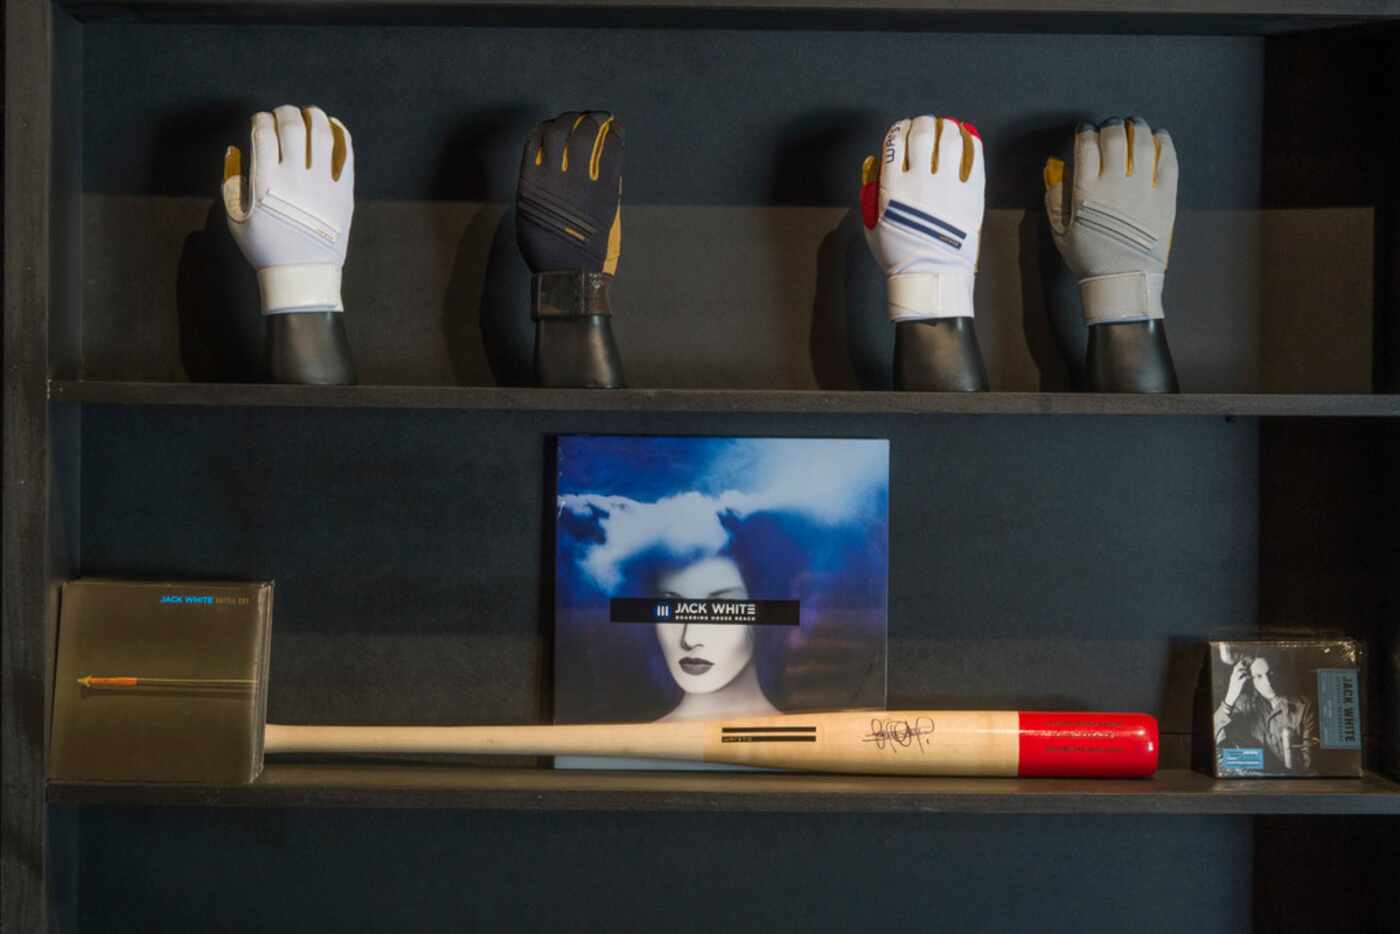 Jack White's music is available, as is the Elvis Andrus bat, at Warstic.  Shot on April 23,...